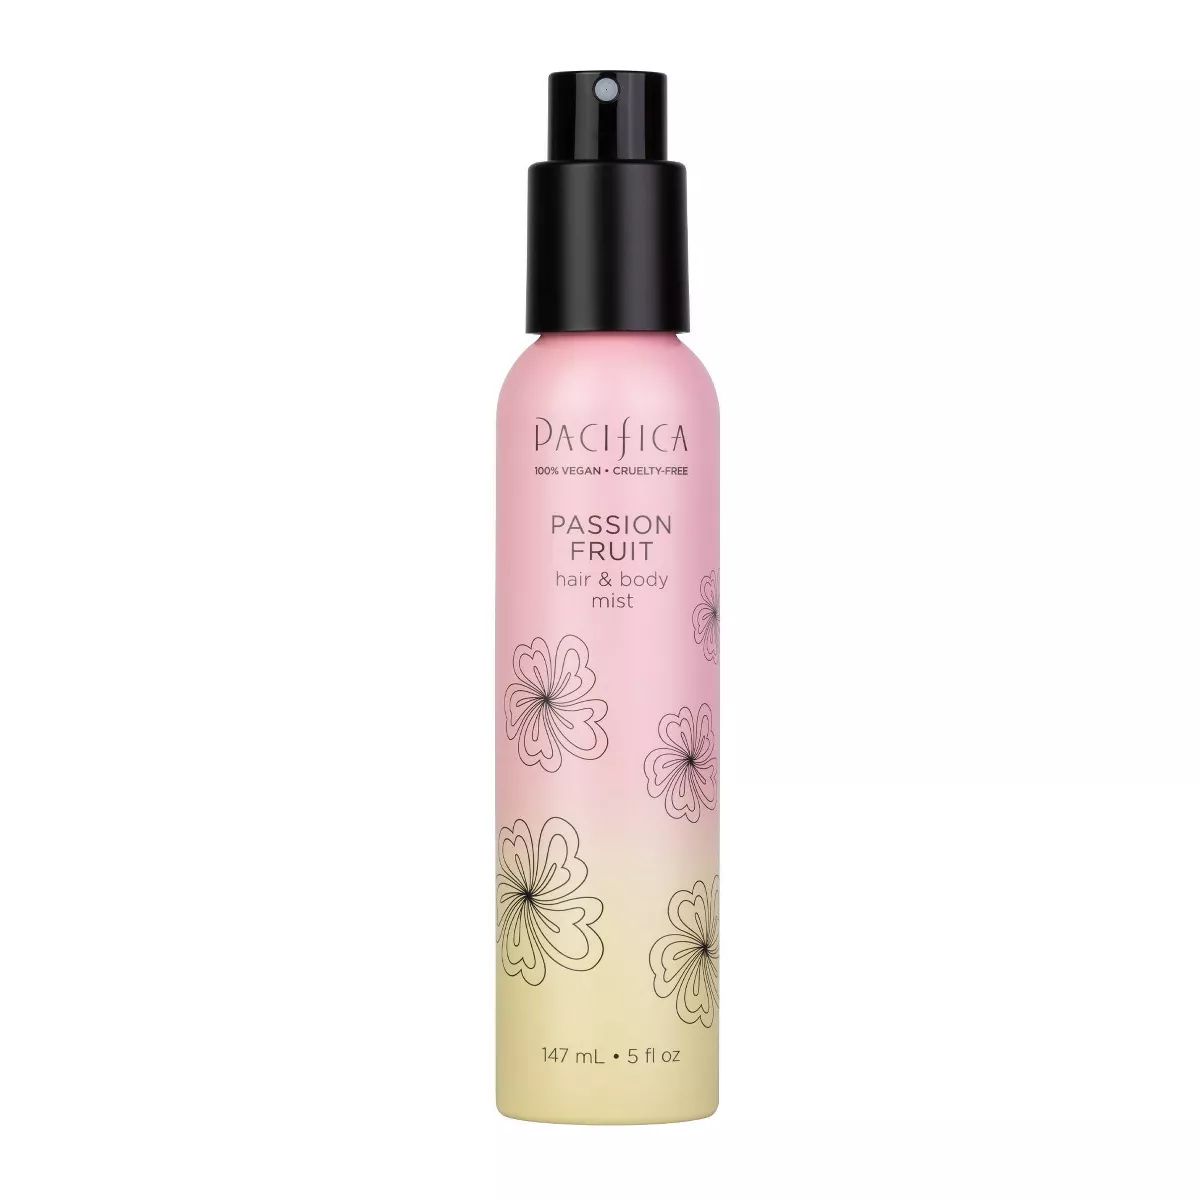 Pacifica Passion fruit Soleil Women's Hair and Body Mist - 5 fl oz | Target